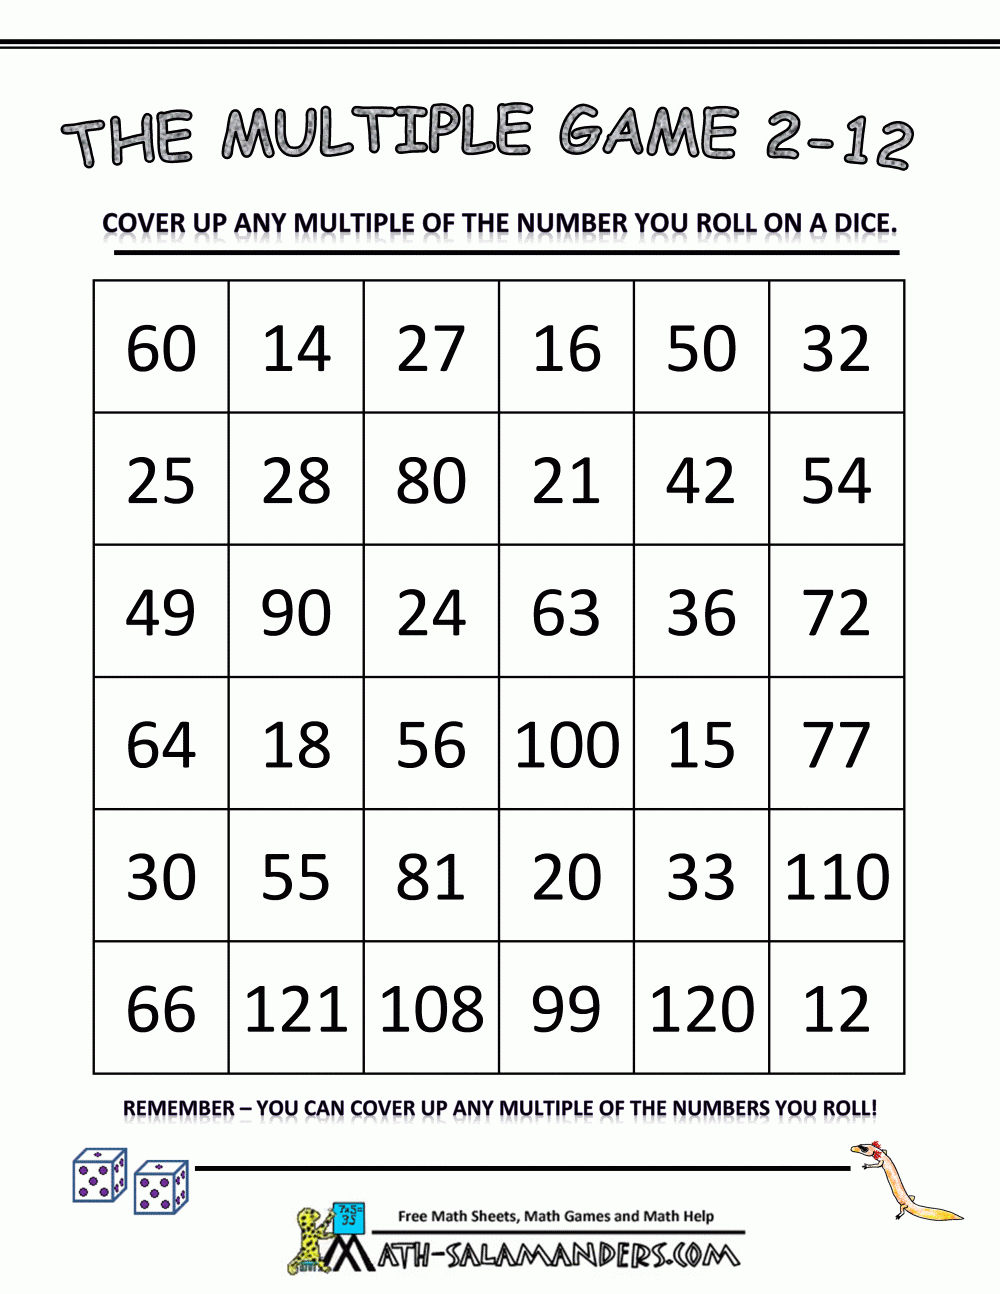 Math-Games-Using-Dice-The-Multiple-Game-2-To-12Bw.gif 1,000 regarding Printable Multiplication Games With Dice